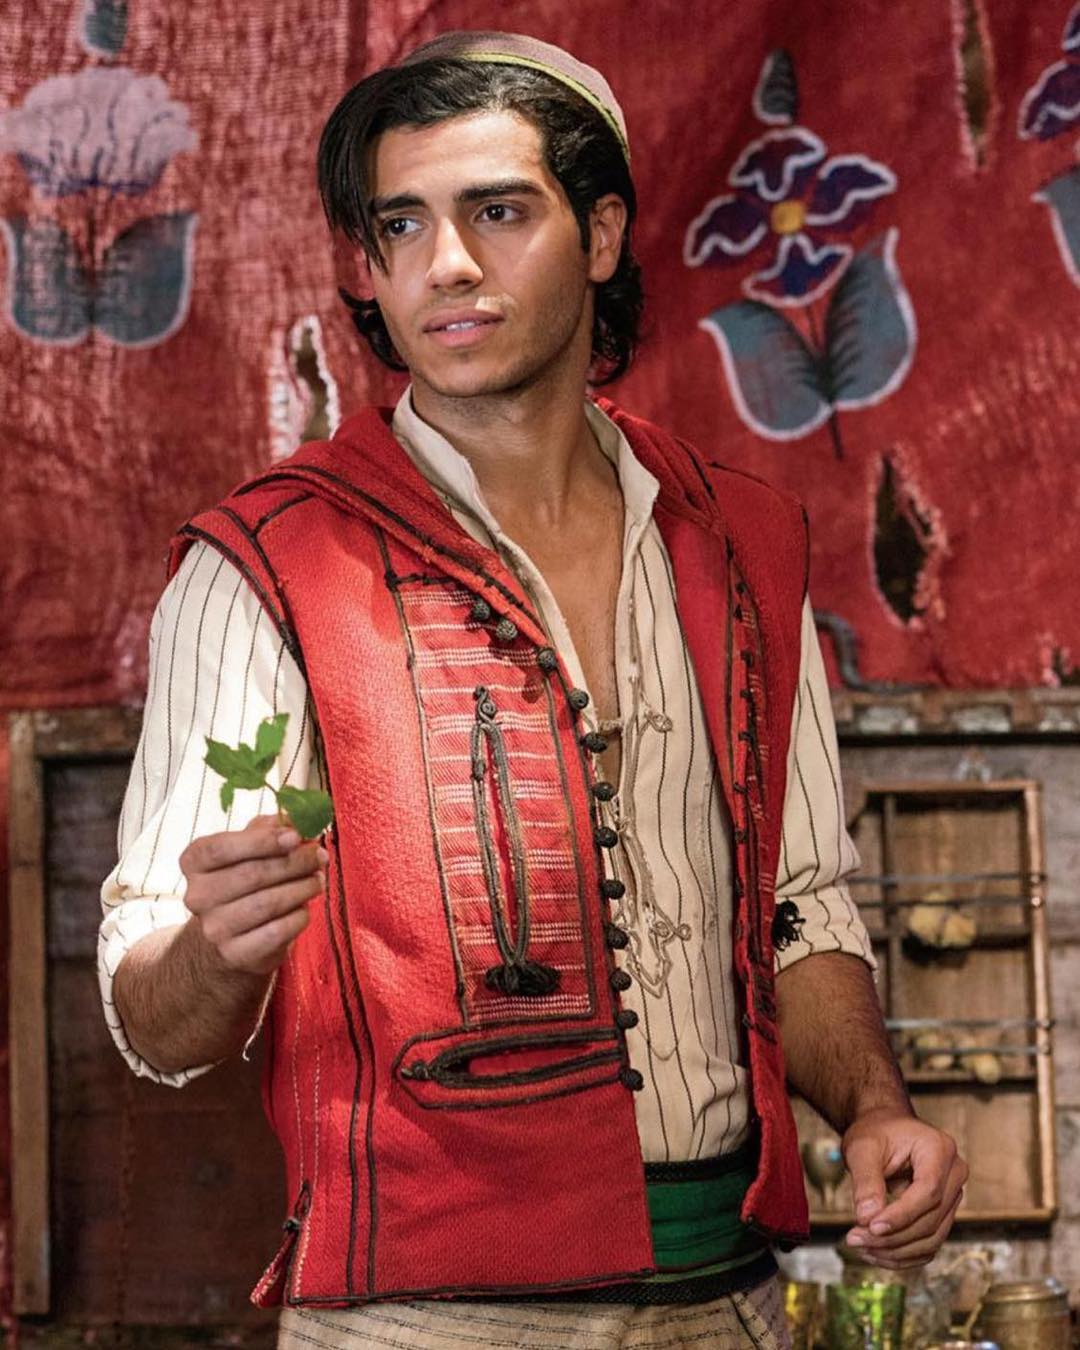 aladdin star mena massoud says starring in a disney film hasn t helped his career at all